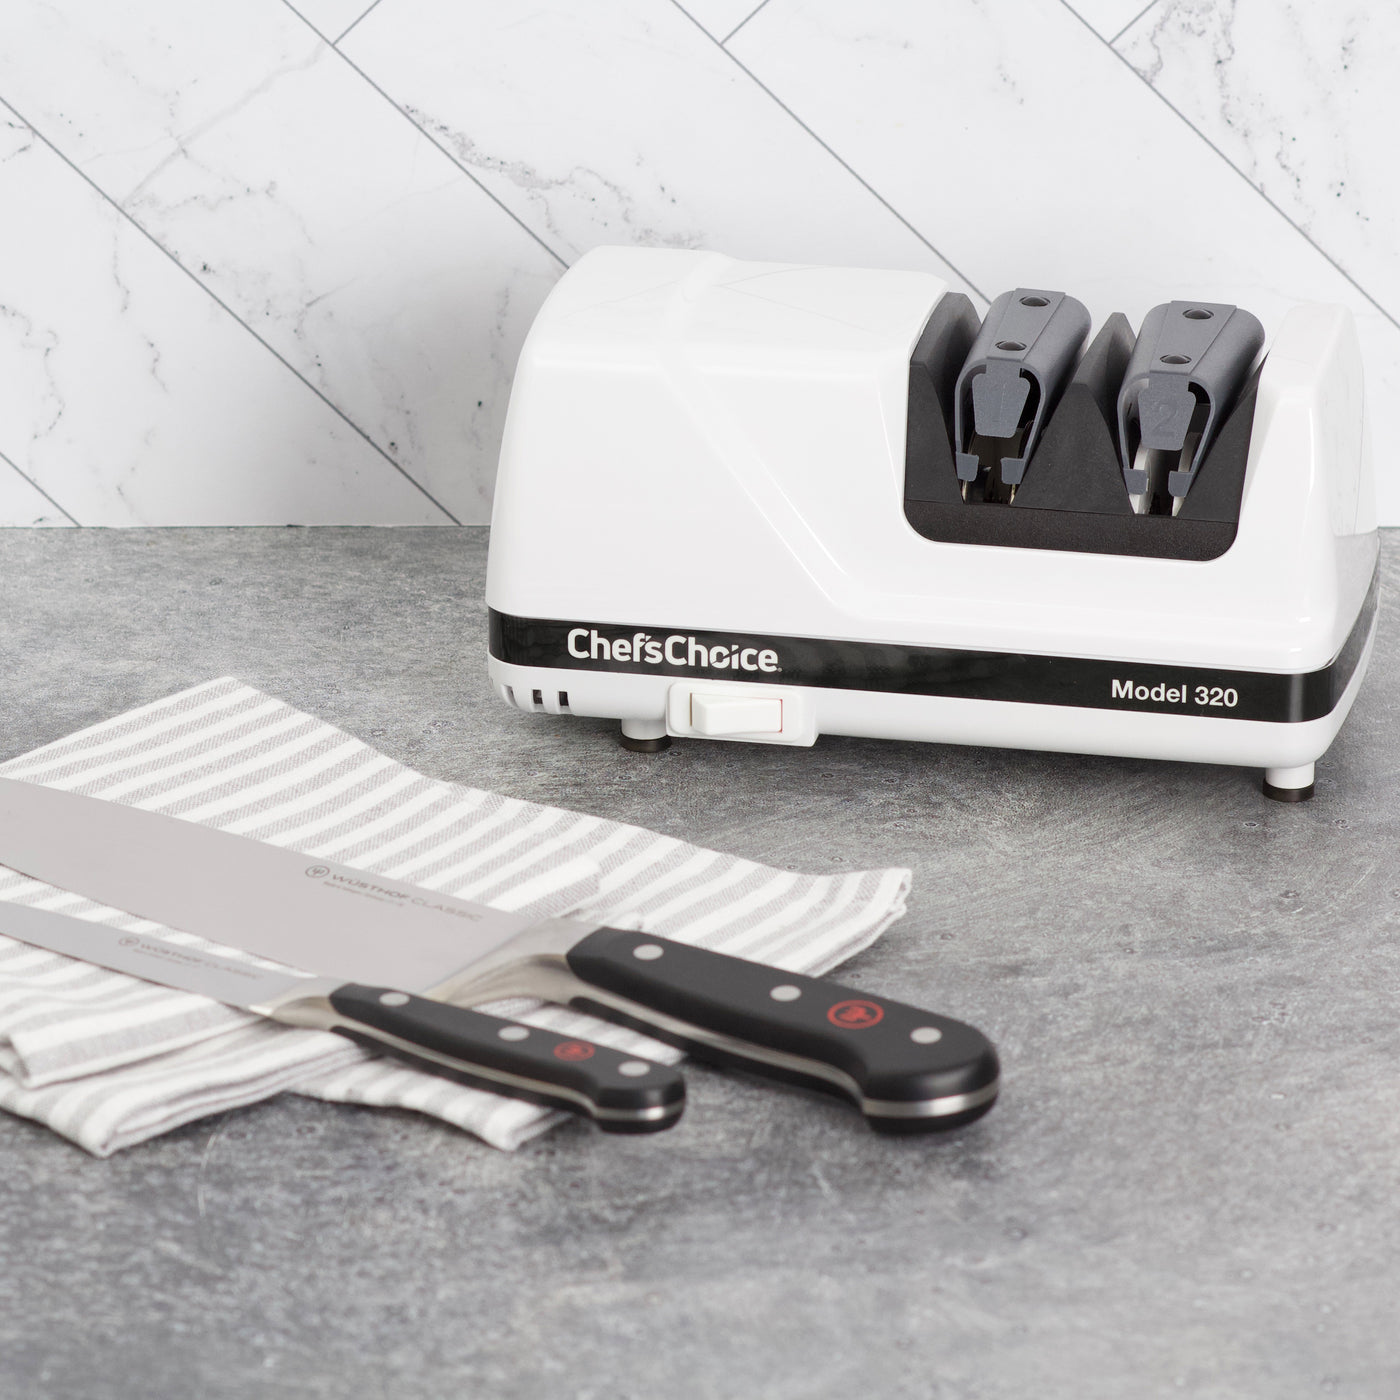 Chef'sChoice Model 320 FlexHone Professional Compact Electric Knife  Sharpener with Diamond Abrasives & Precision Angle Control White 0320000 -  Best Buy